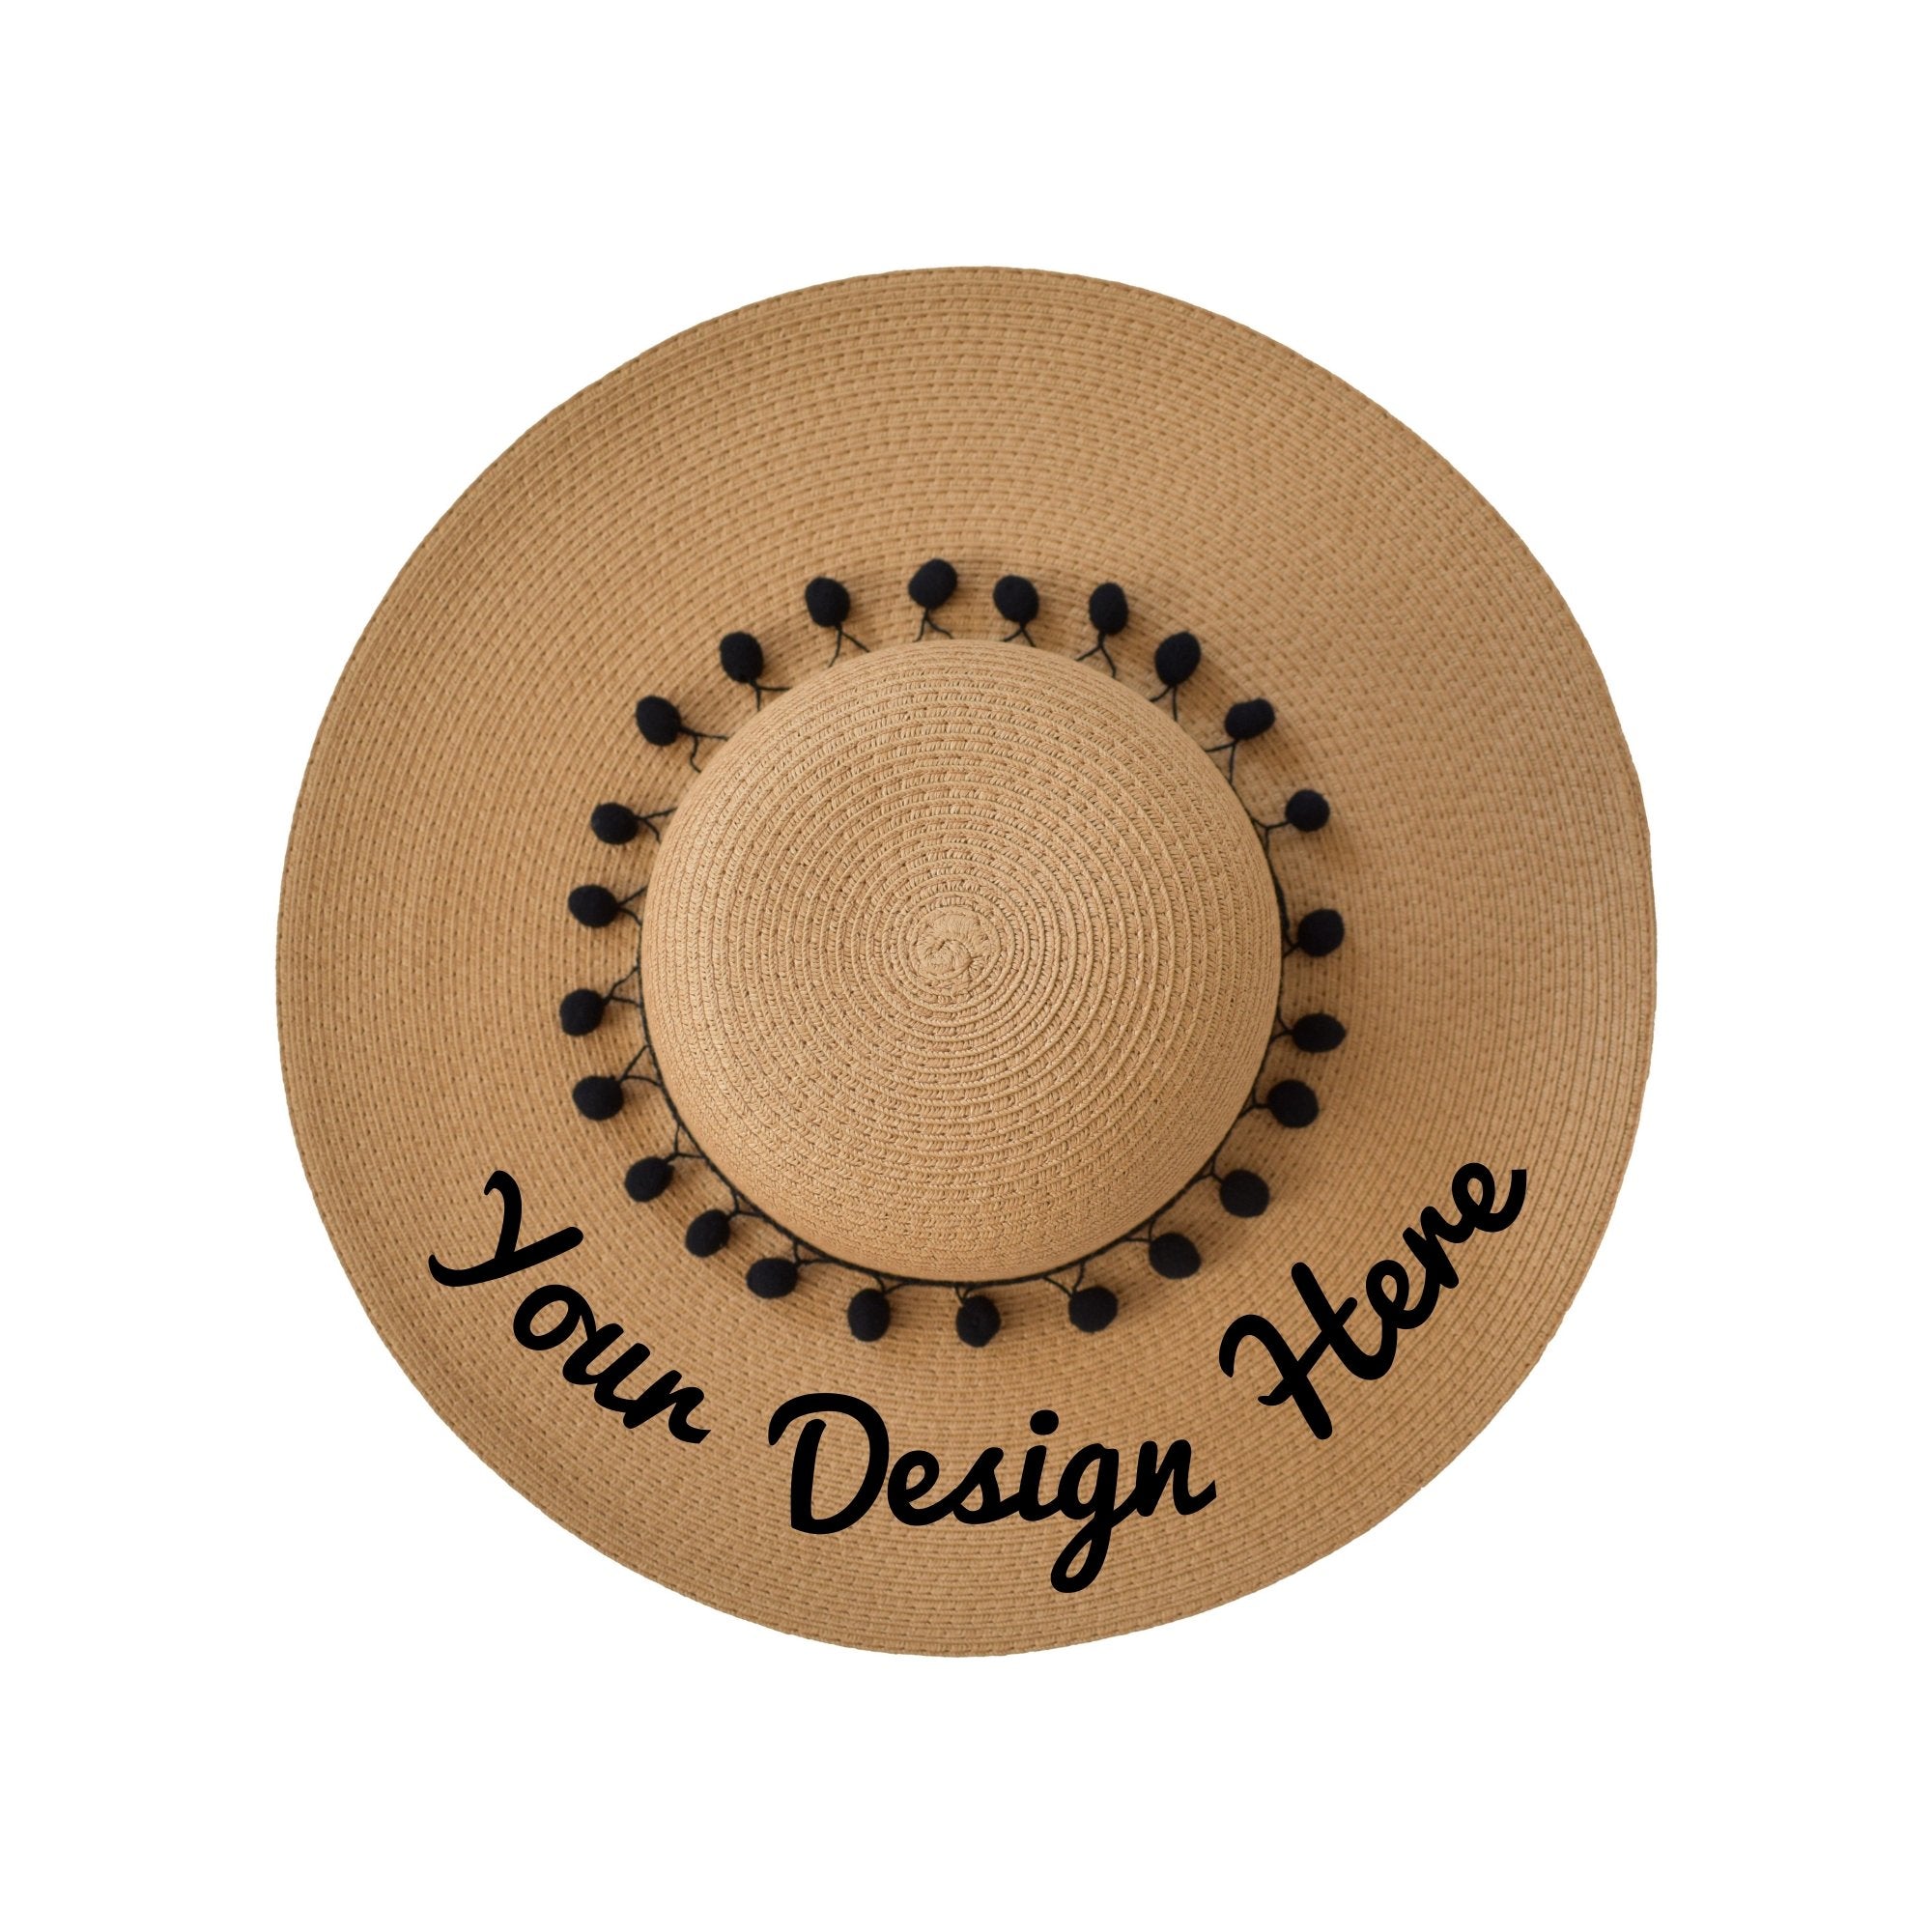 A floppy beach hat with black pompoms that can be customized